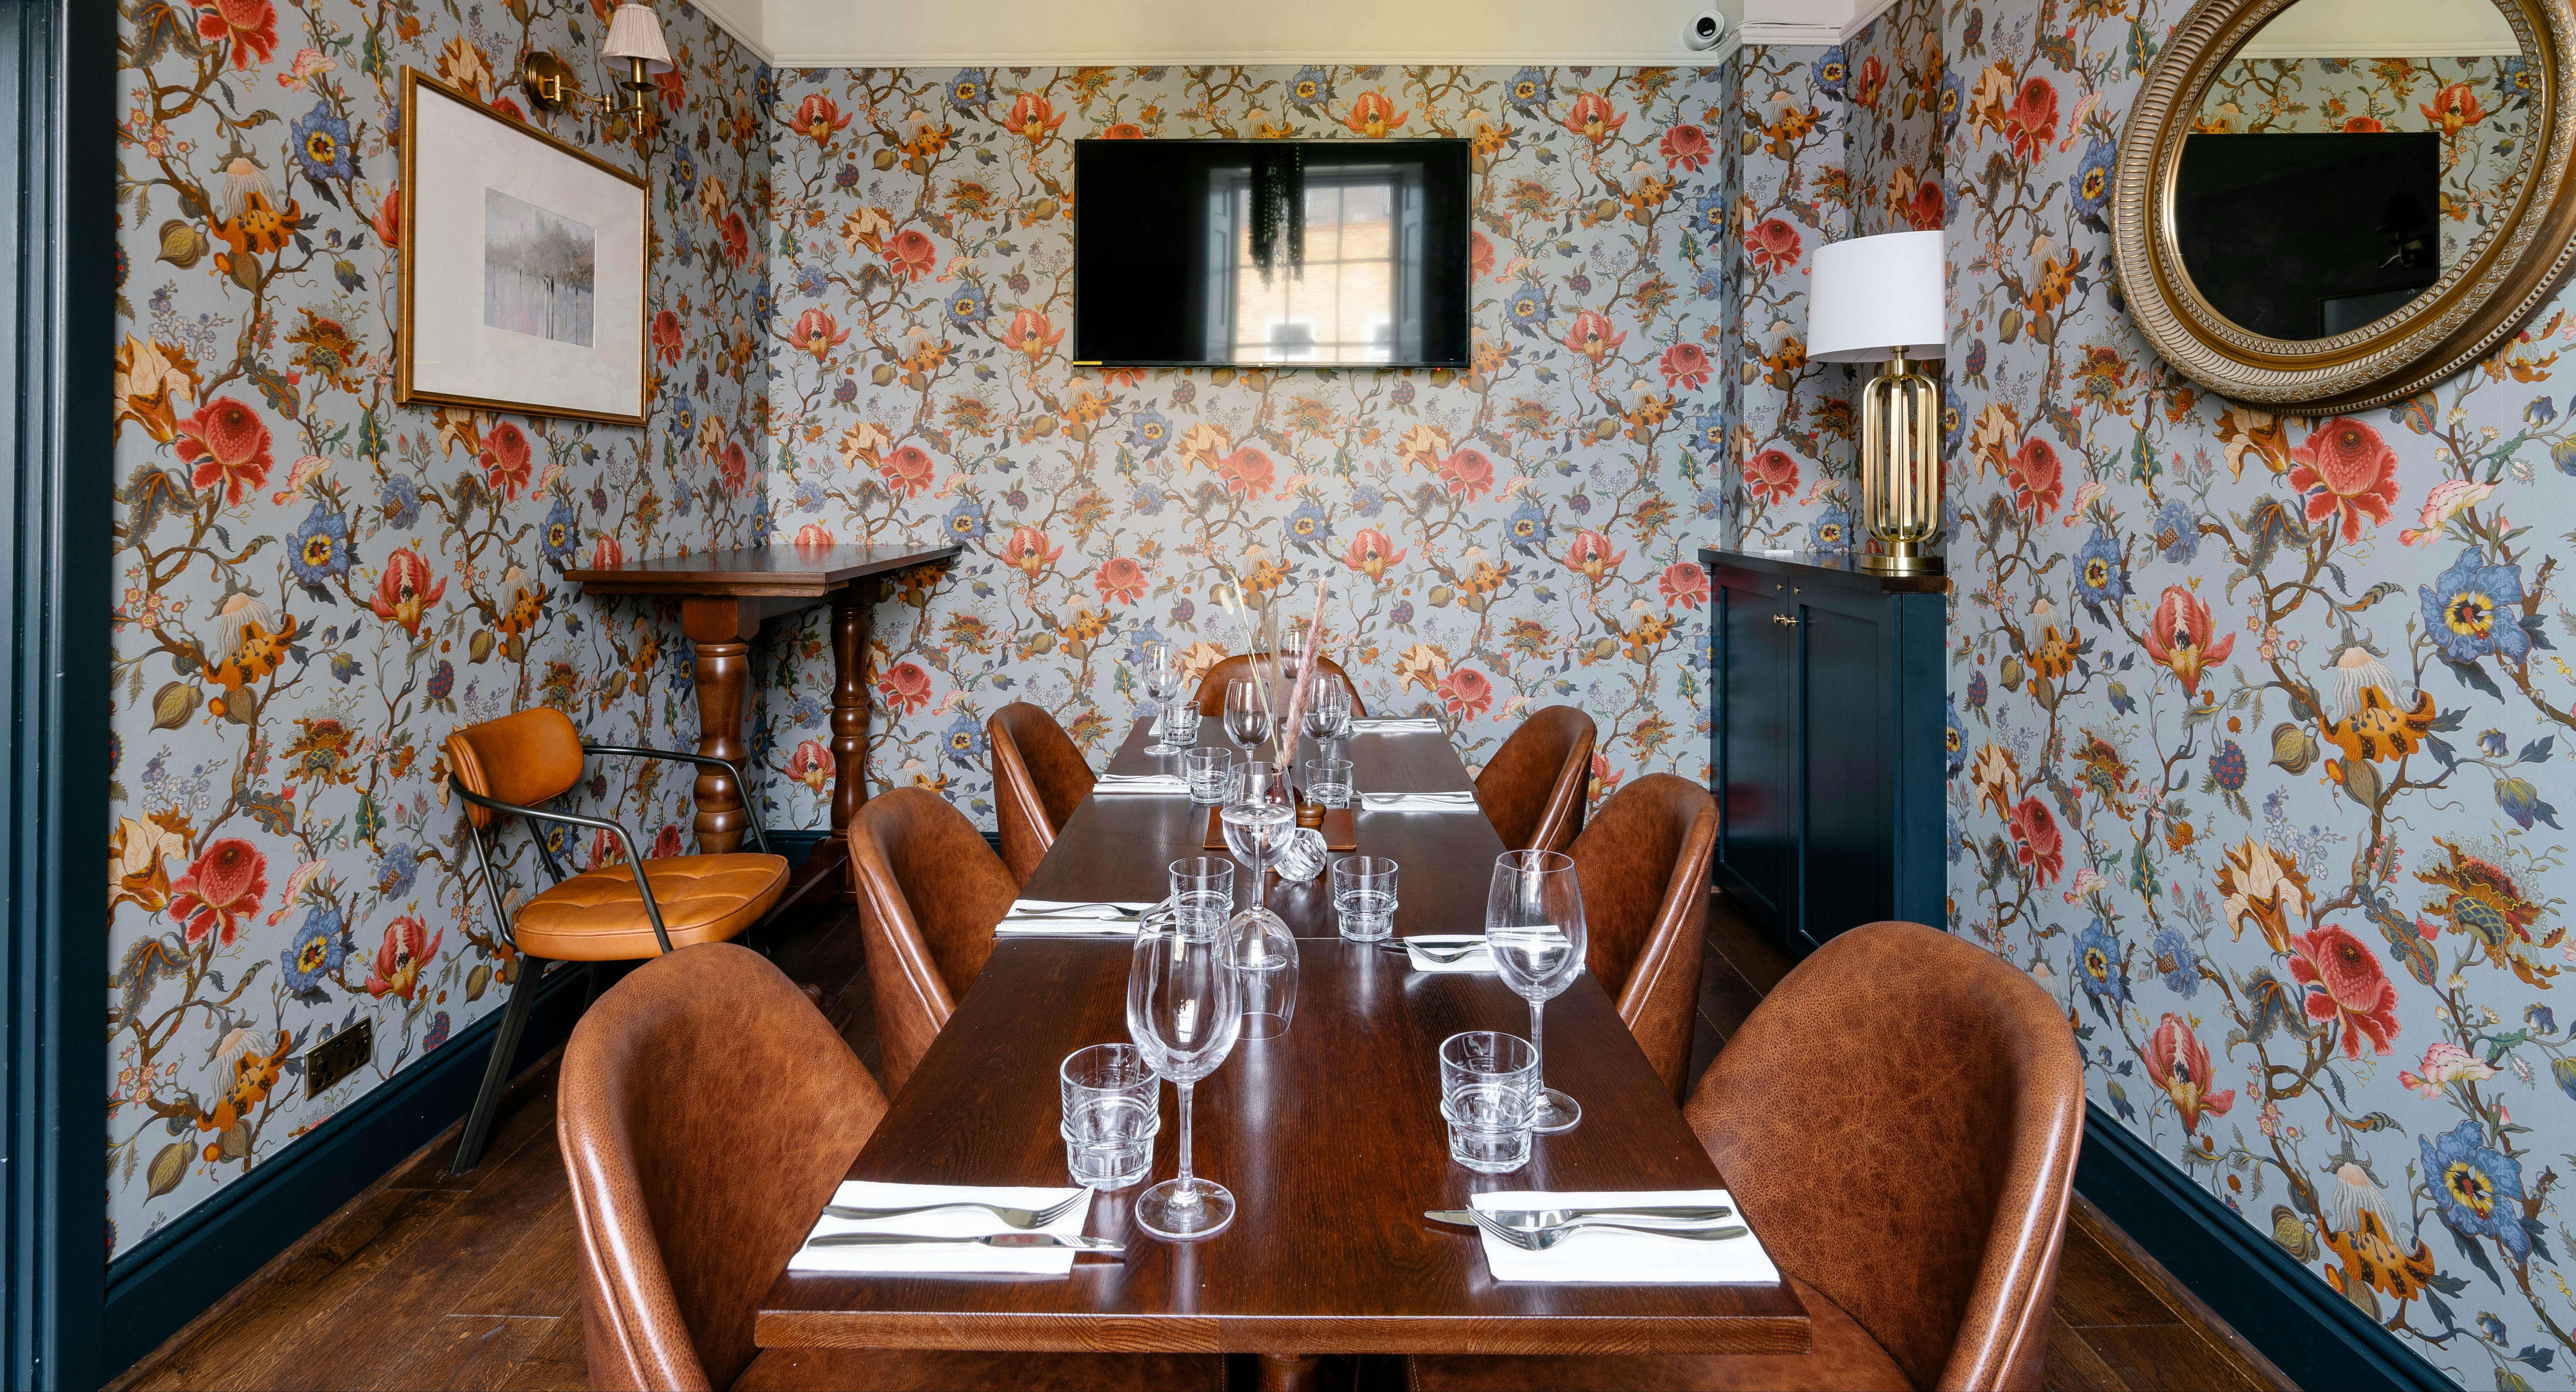 Photo of restaurant The Lillie Langtry in Fulham, London